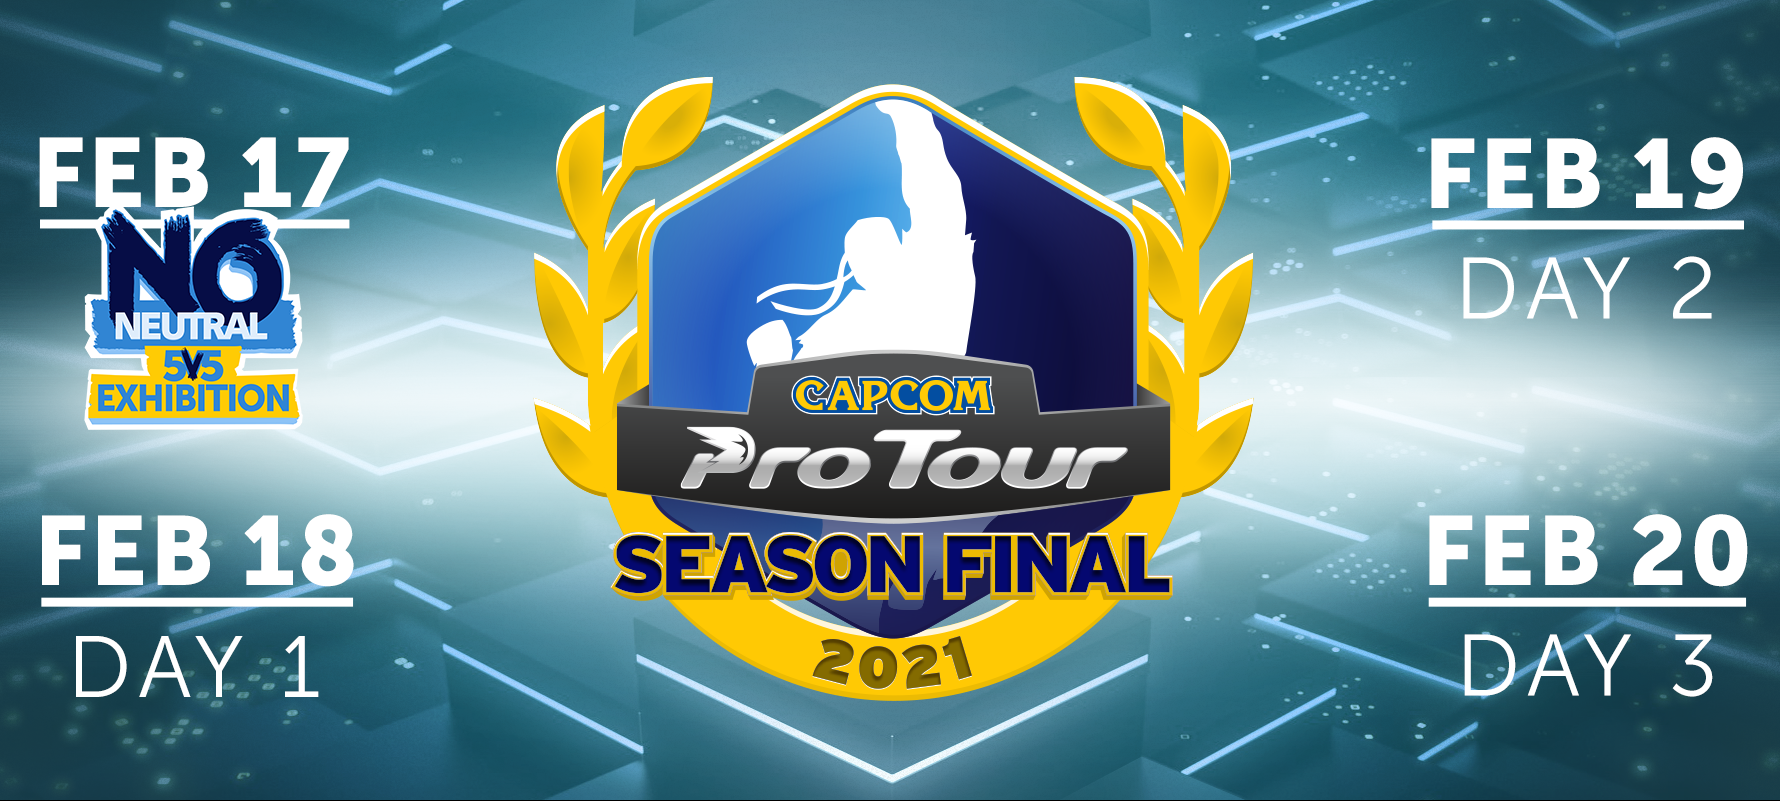 Here's how the 20 qualified competitors will be grouped for Capcom Cup 2020